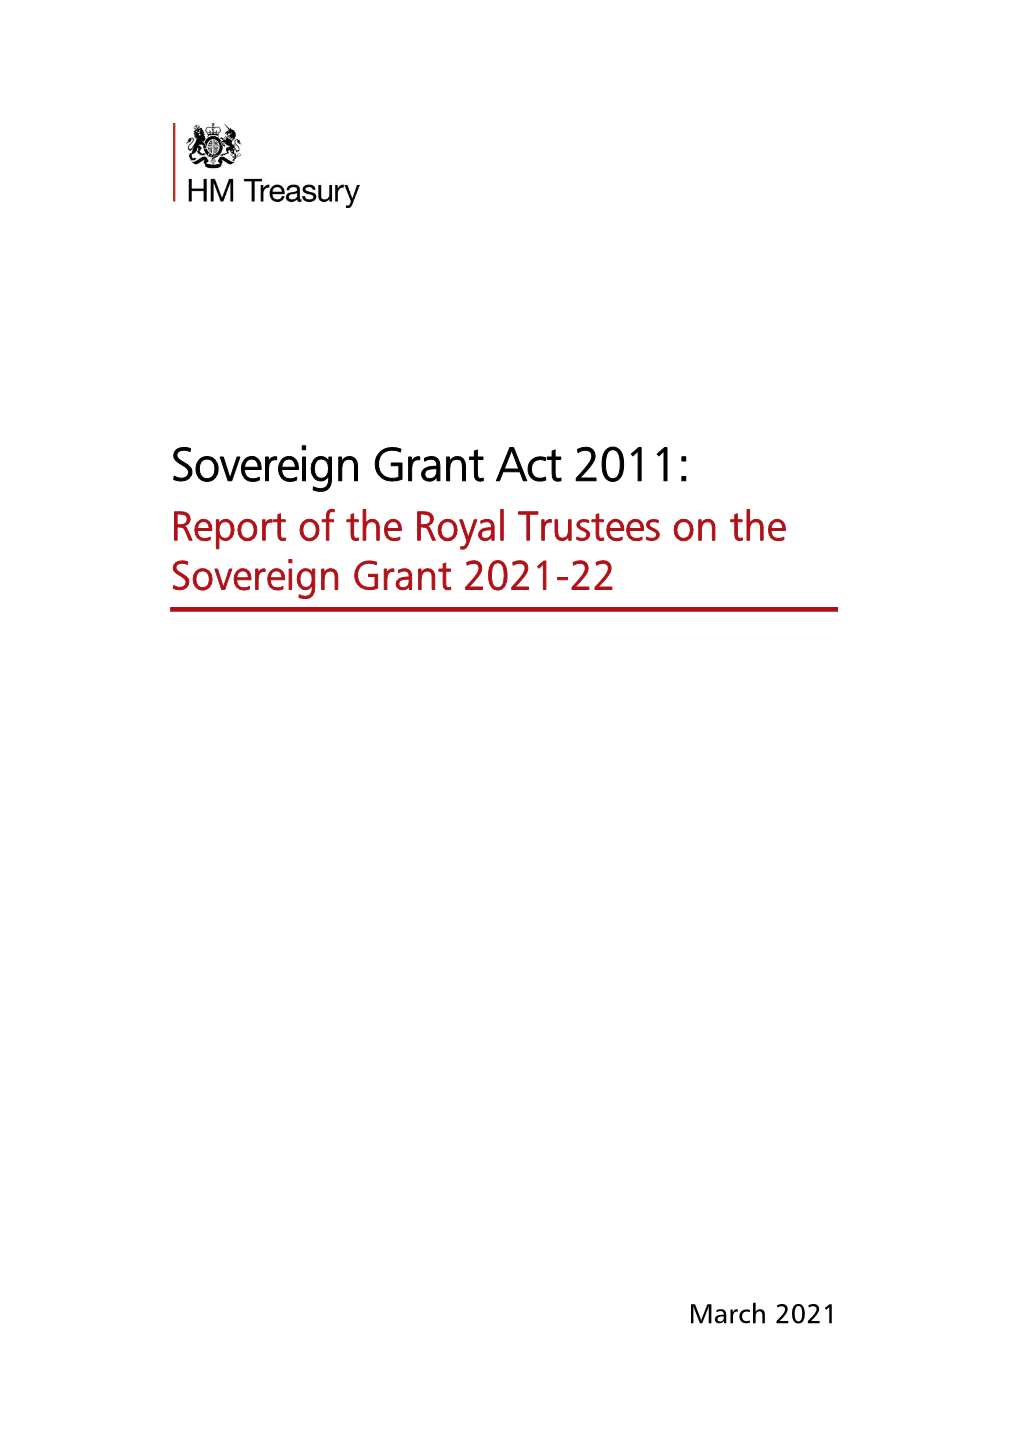 Sovereign Grant Act 2011: Report of the Royal Trustees on the Sovereign Grant 2021-22